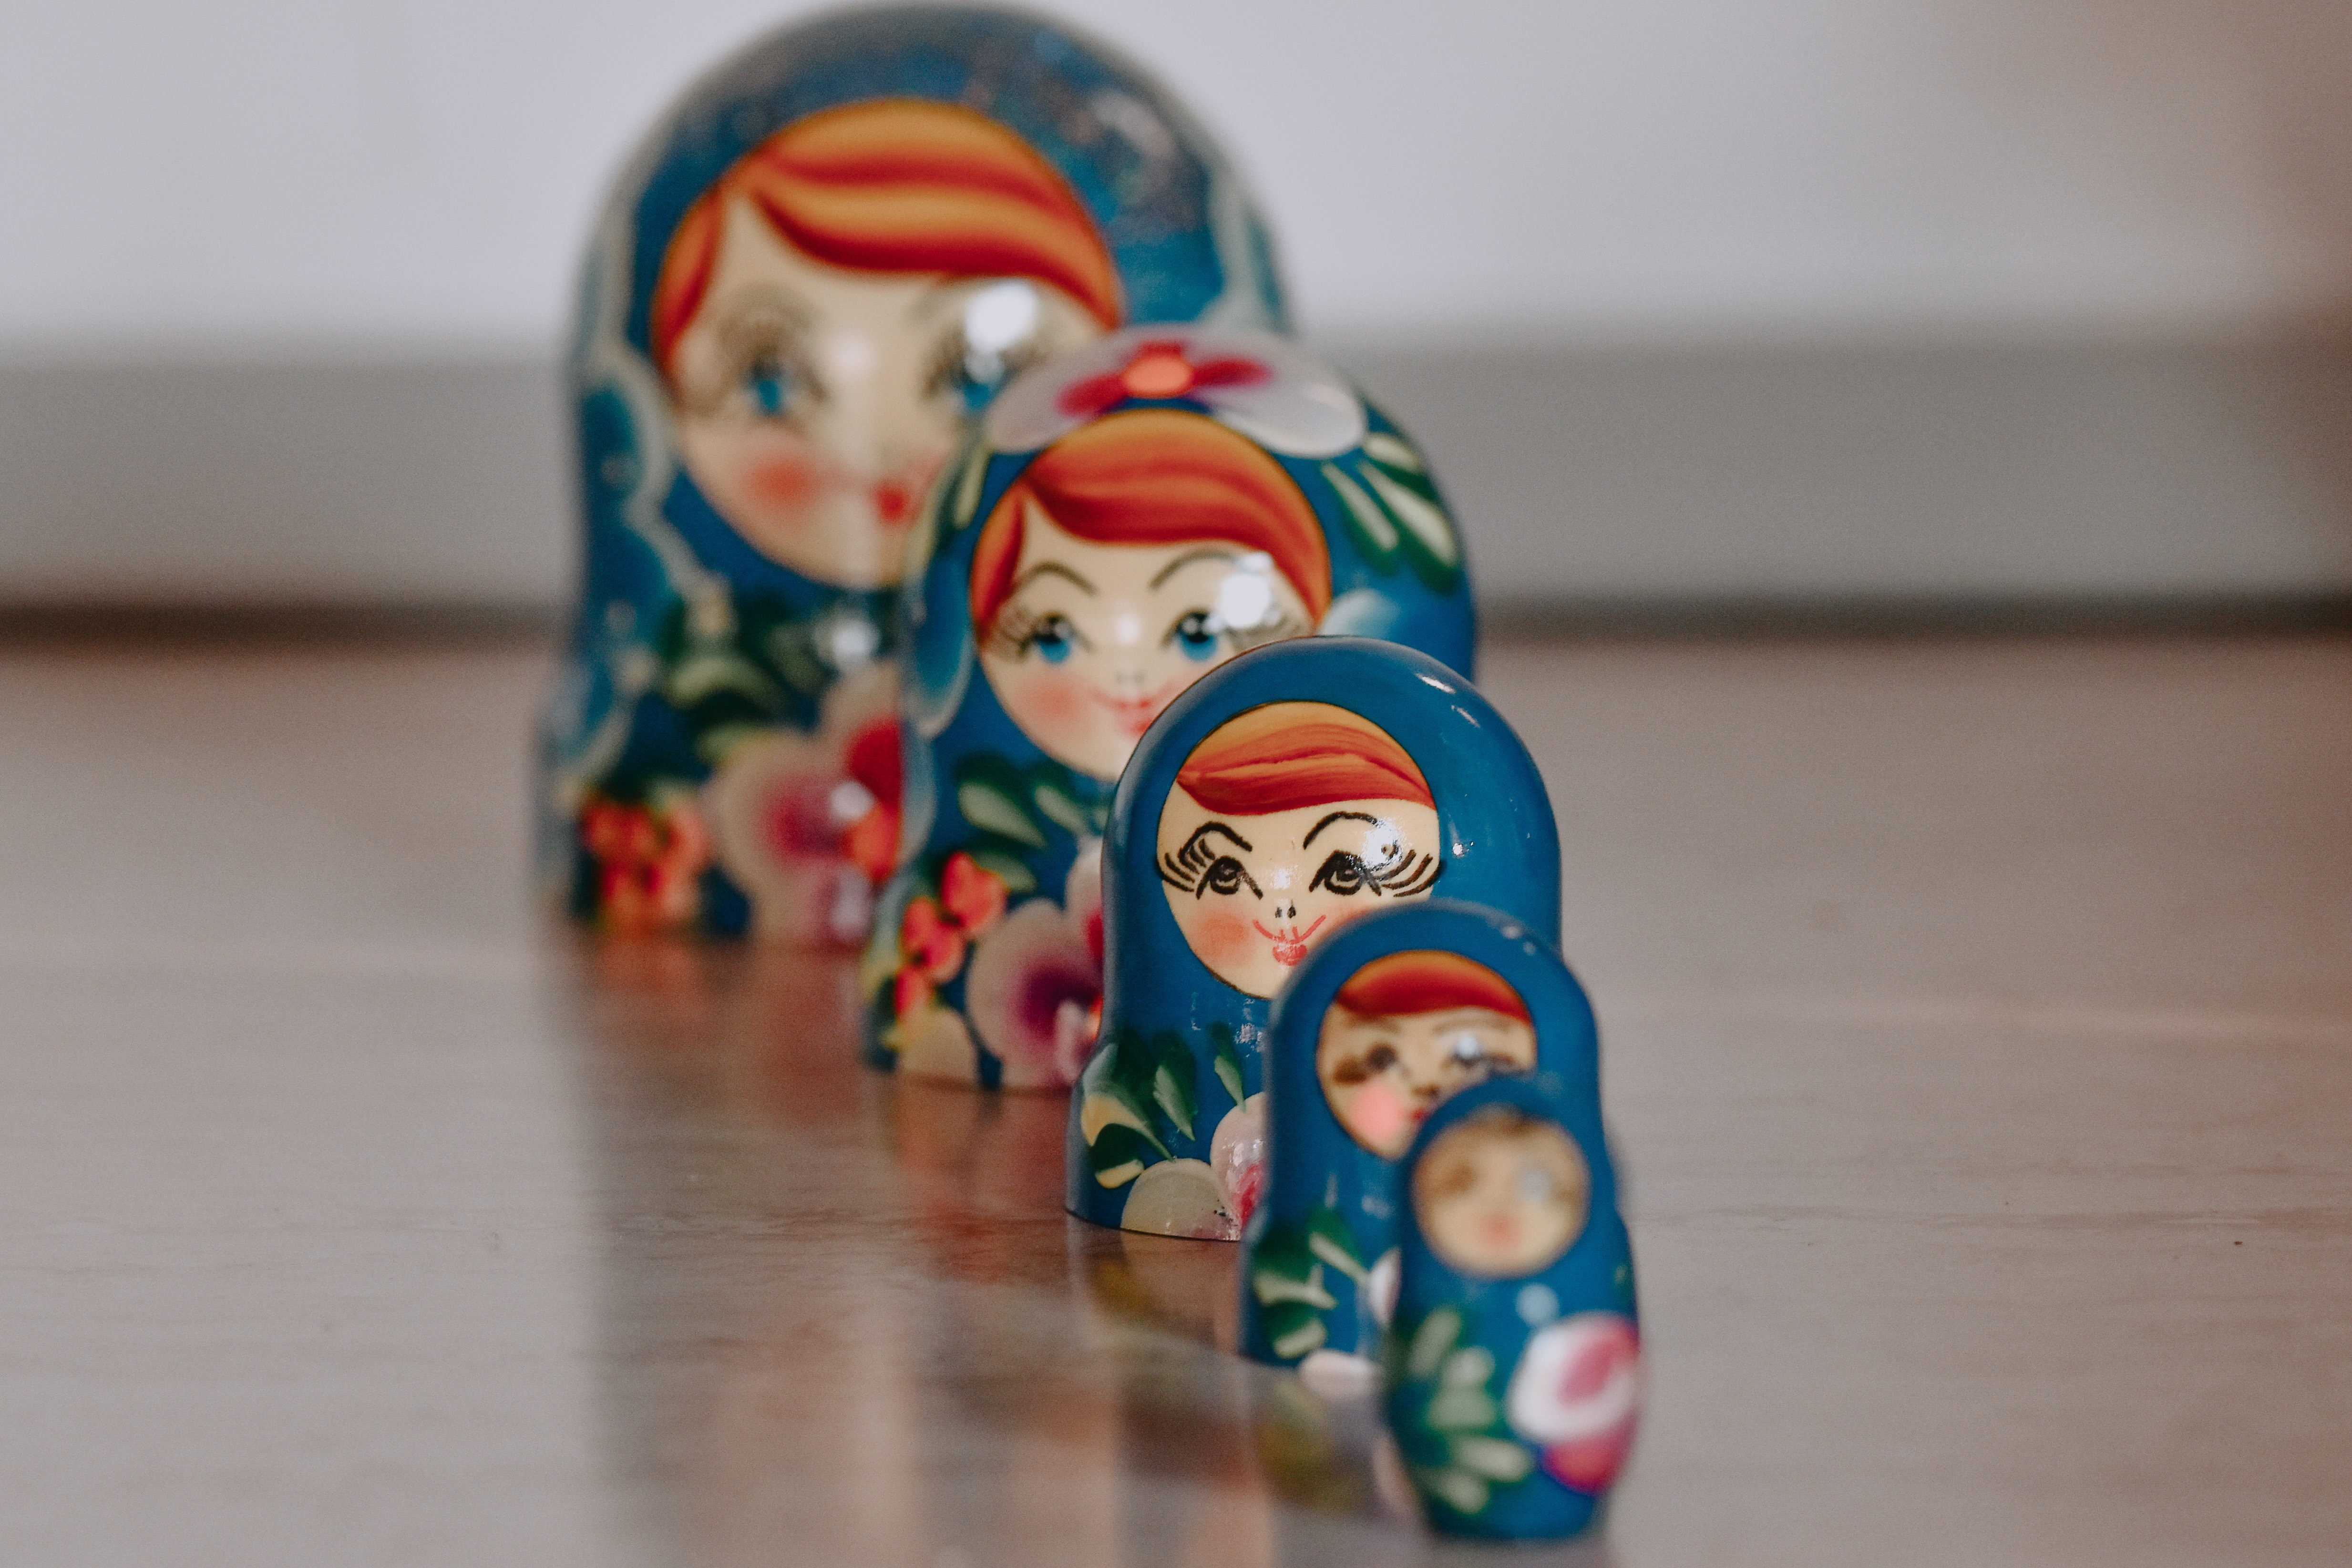 Crafting user stories are a bit like nested Russian dolls.  So how do you get the size just right?